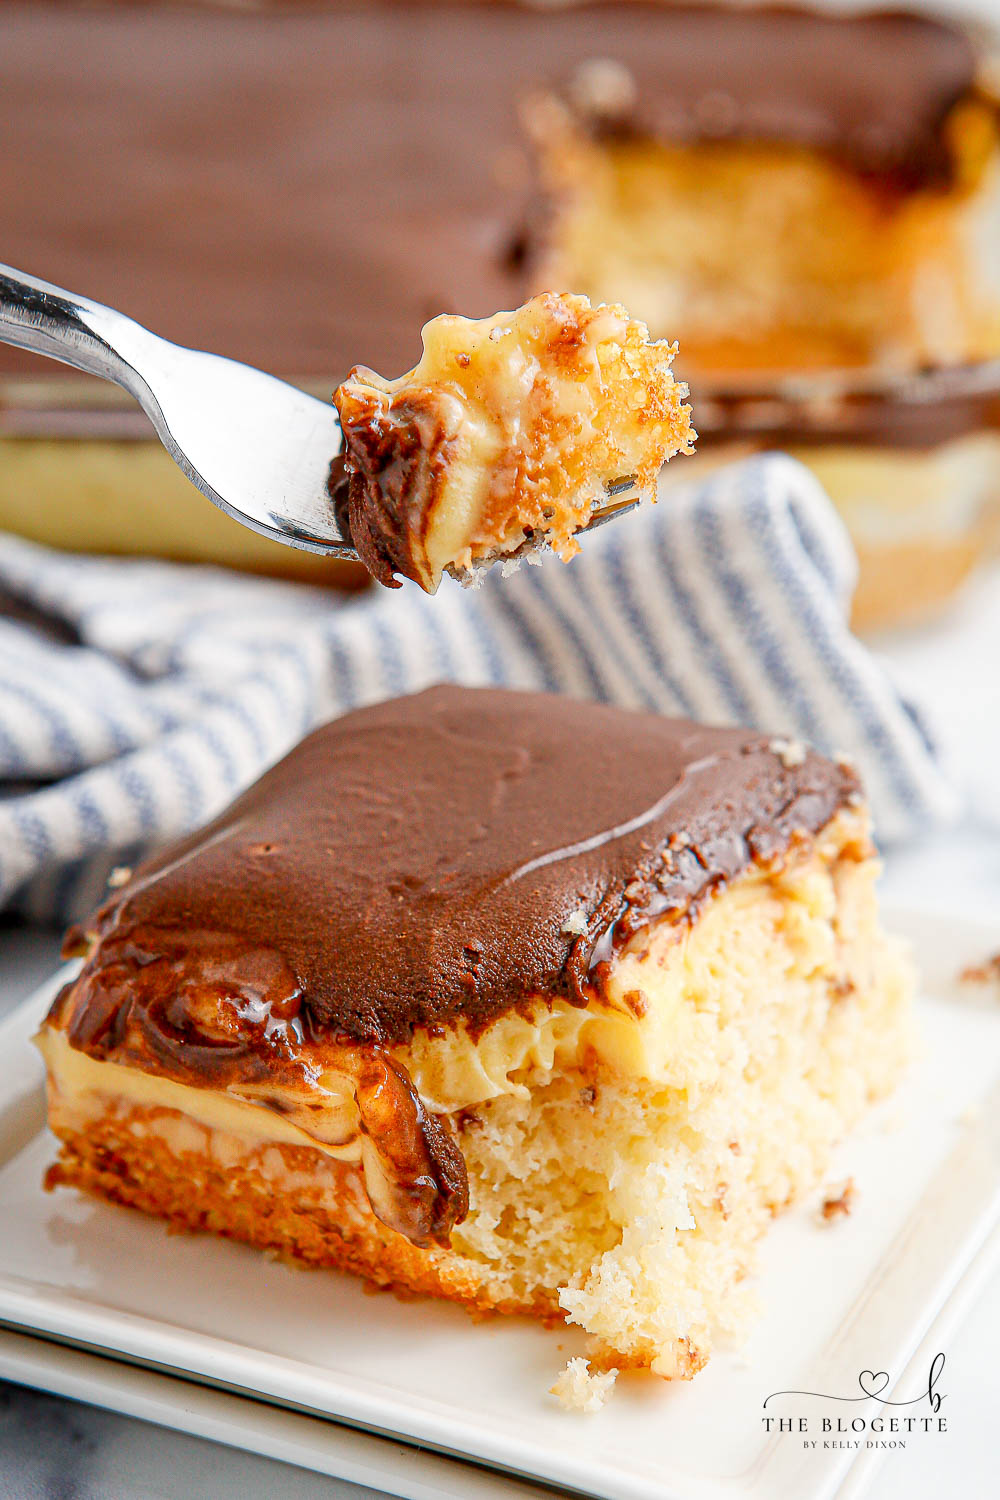 Boston Cream Poke Cake is so simple to whip up. With cake, pudding, and chocolate frosting, this cake is a quick spin on Boston Cream Pie!